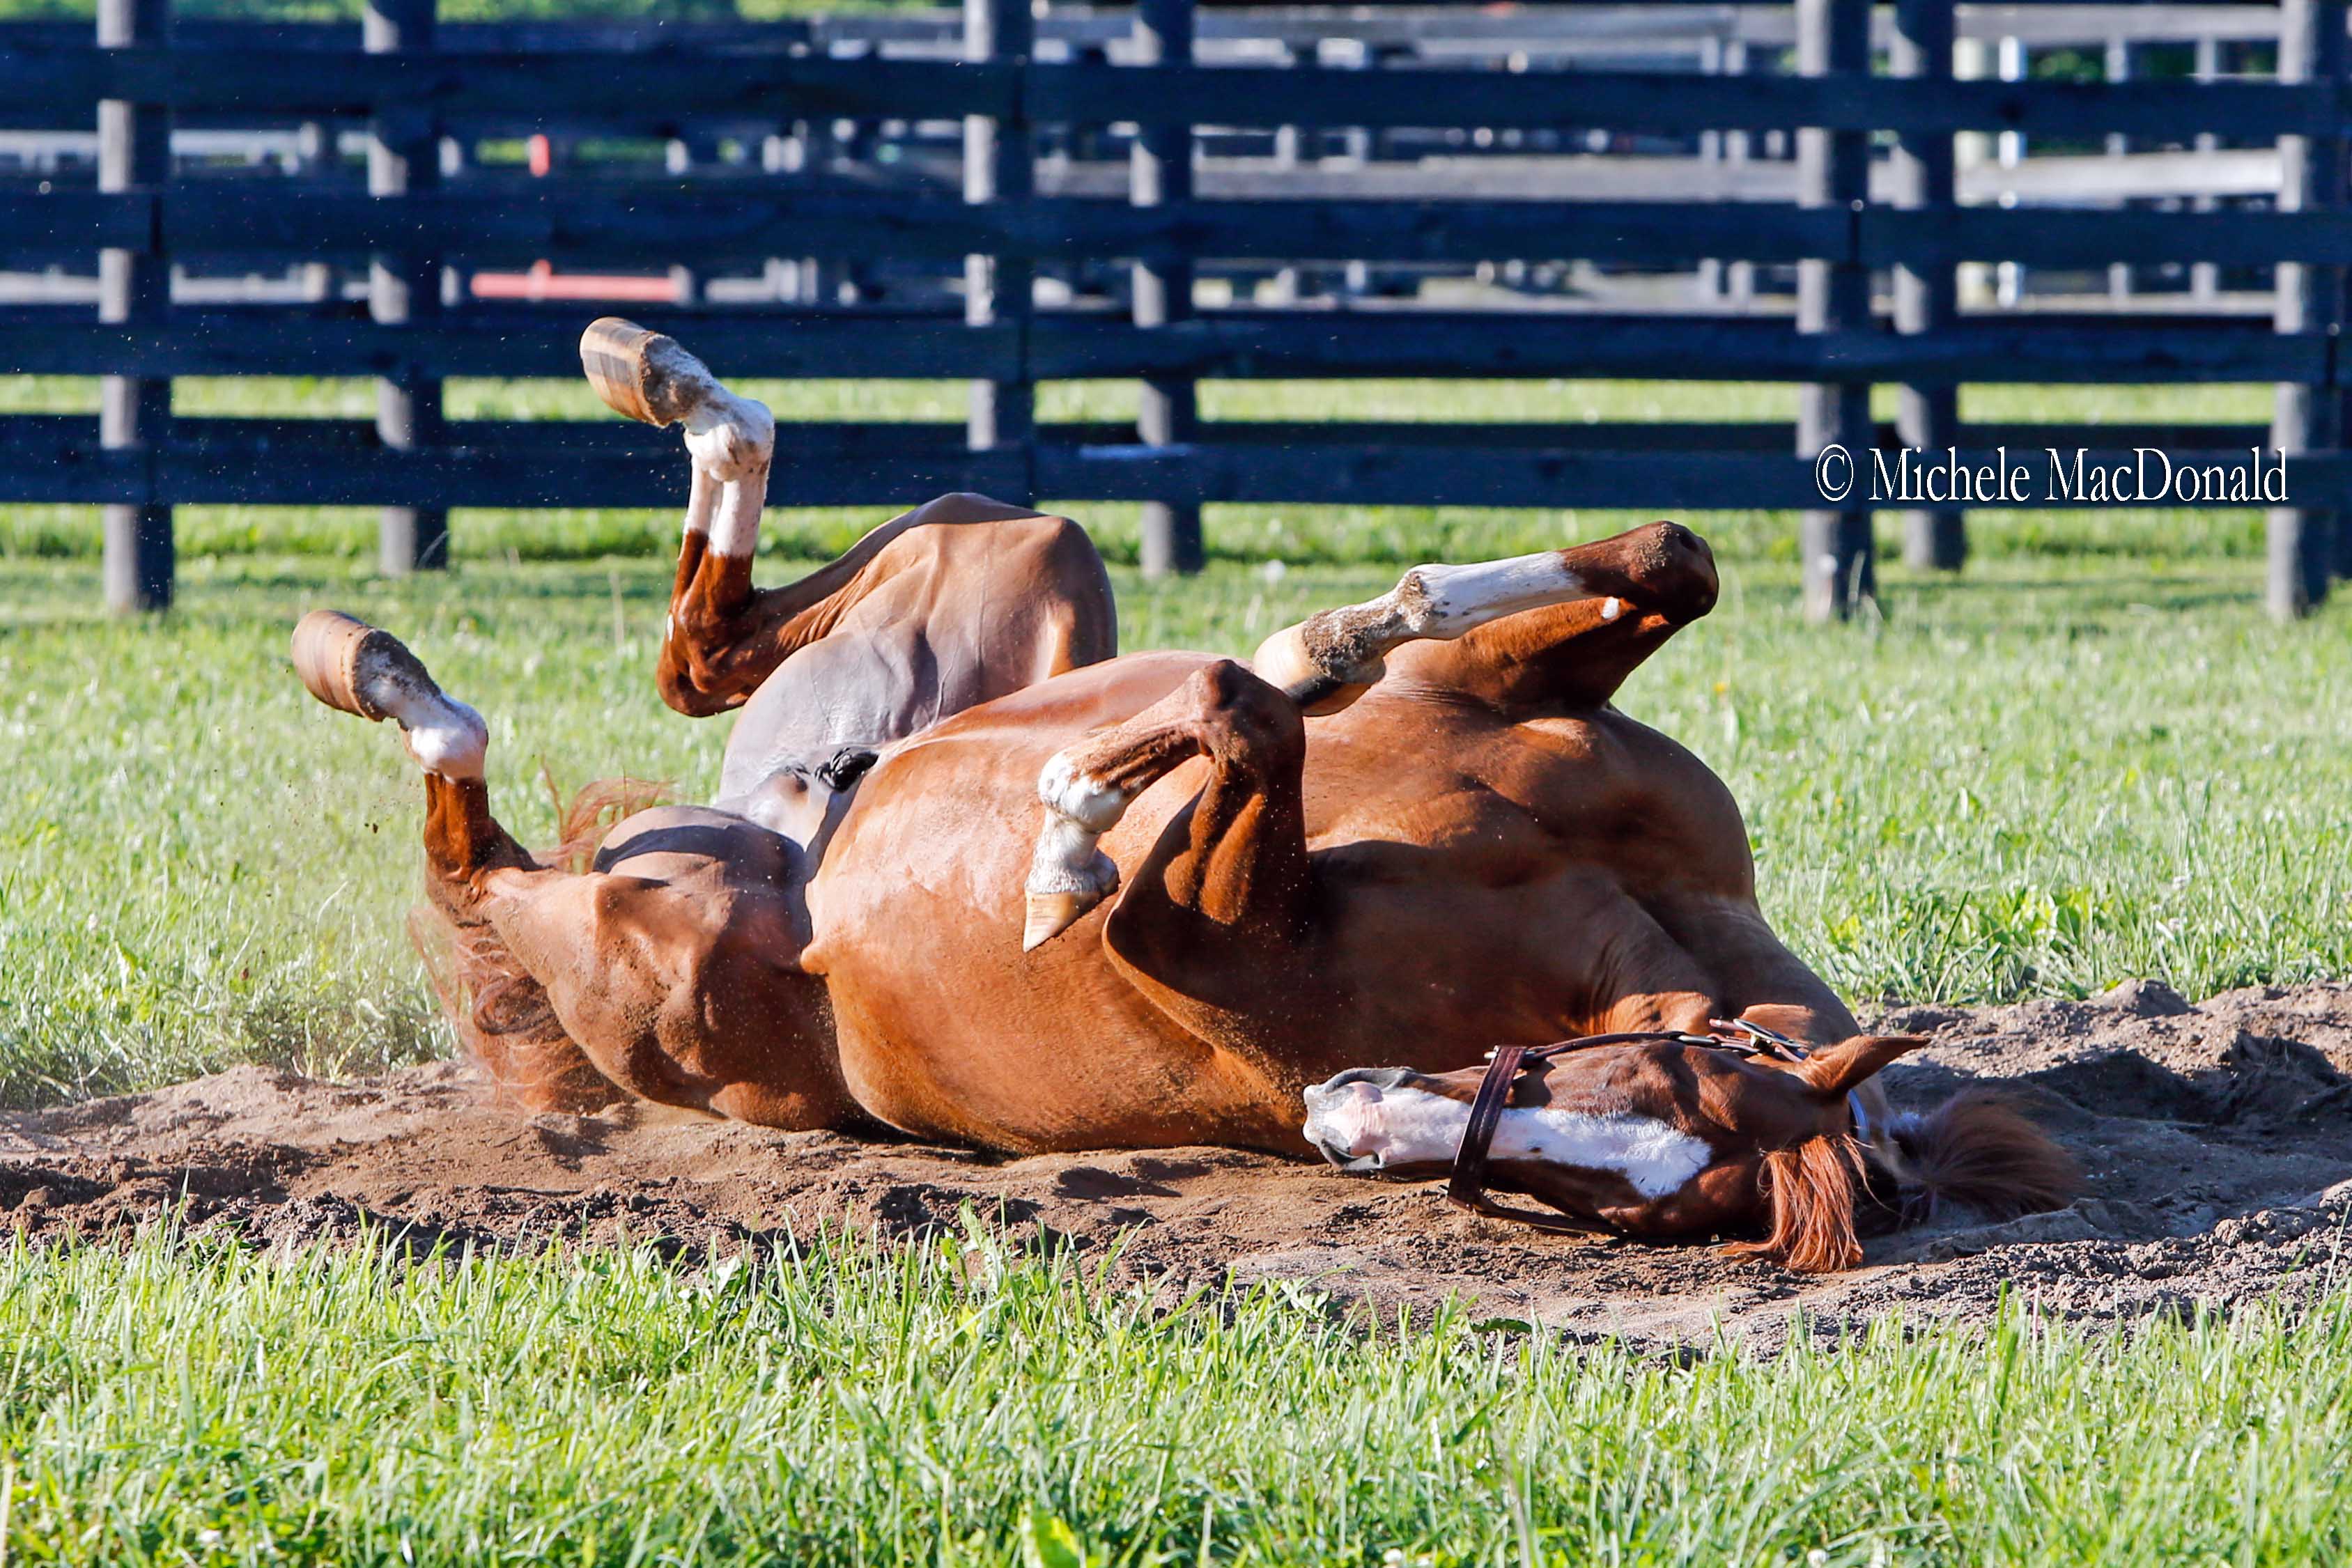 Chrome enjoys a vigorous roll in the sandpit in his paddock. Photo: Michele MacDonald